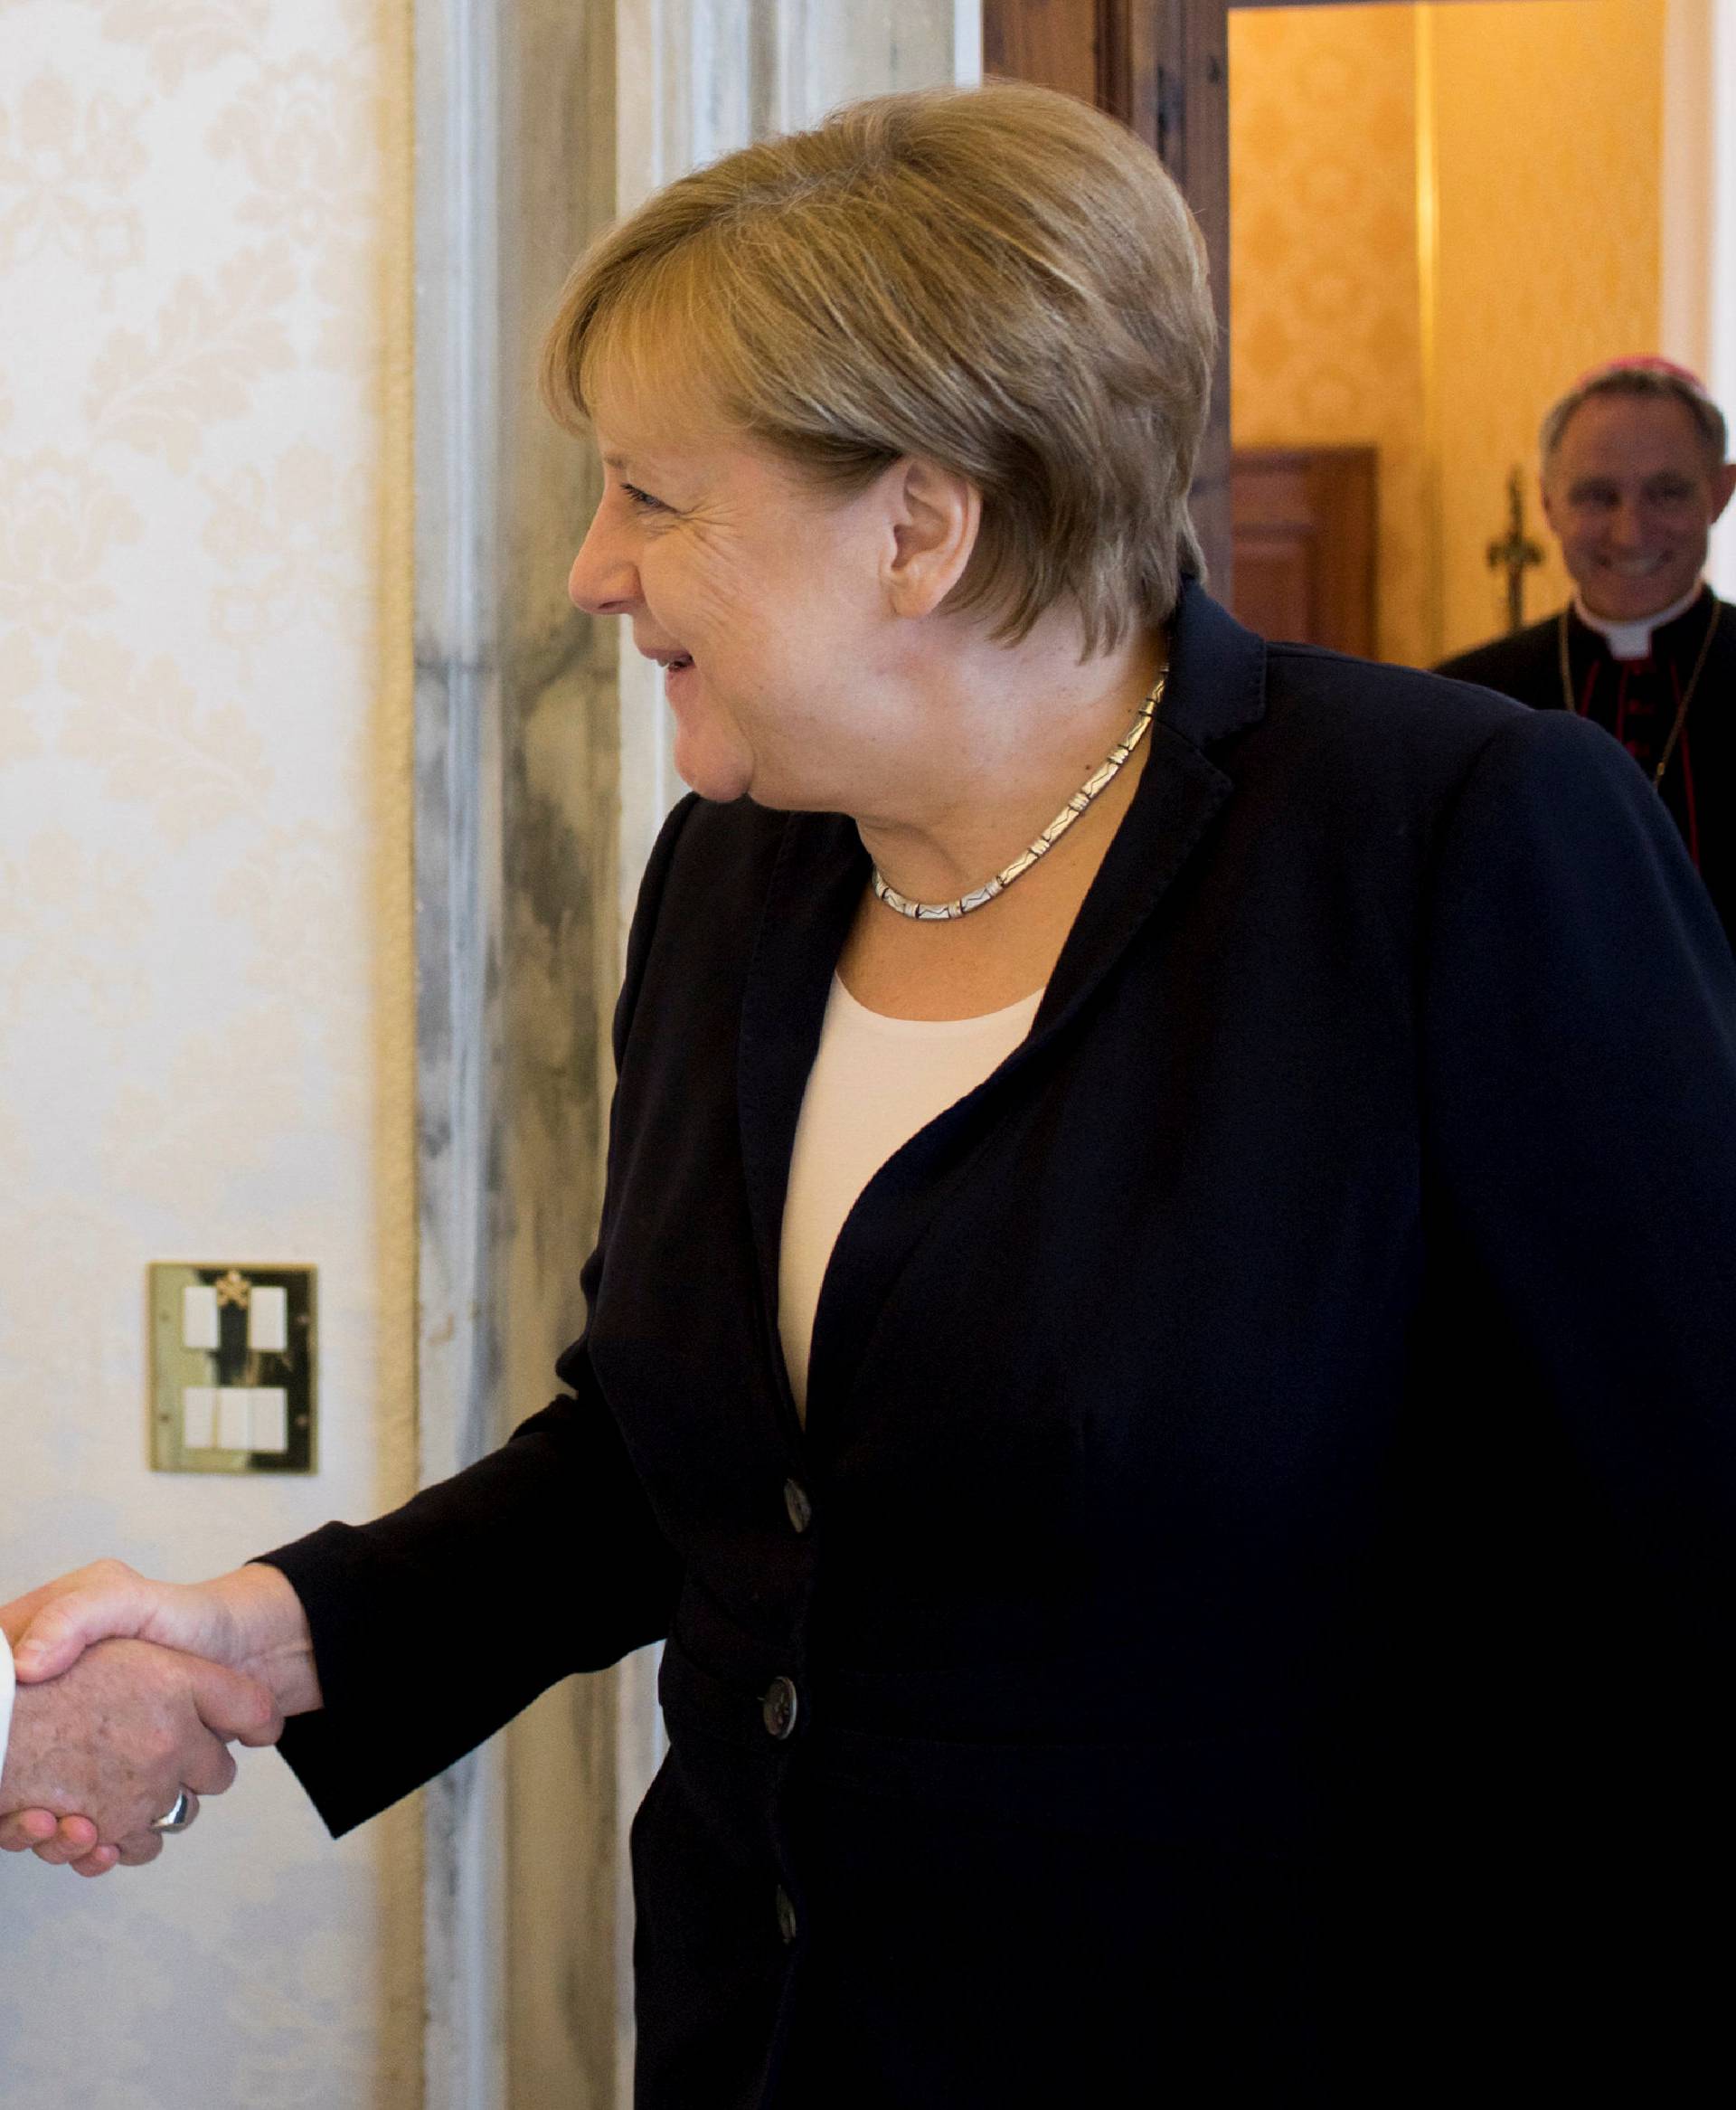 Pope Francis greets German Chancellor Angela Merkel during a meeting at the Vatican